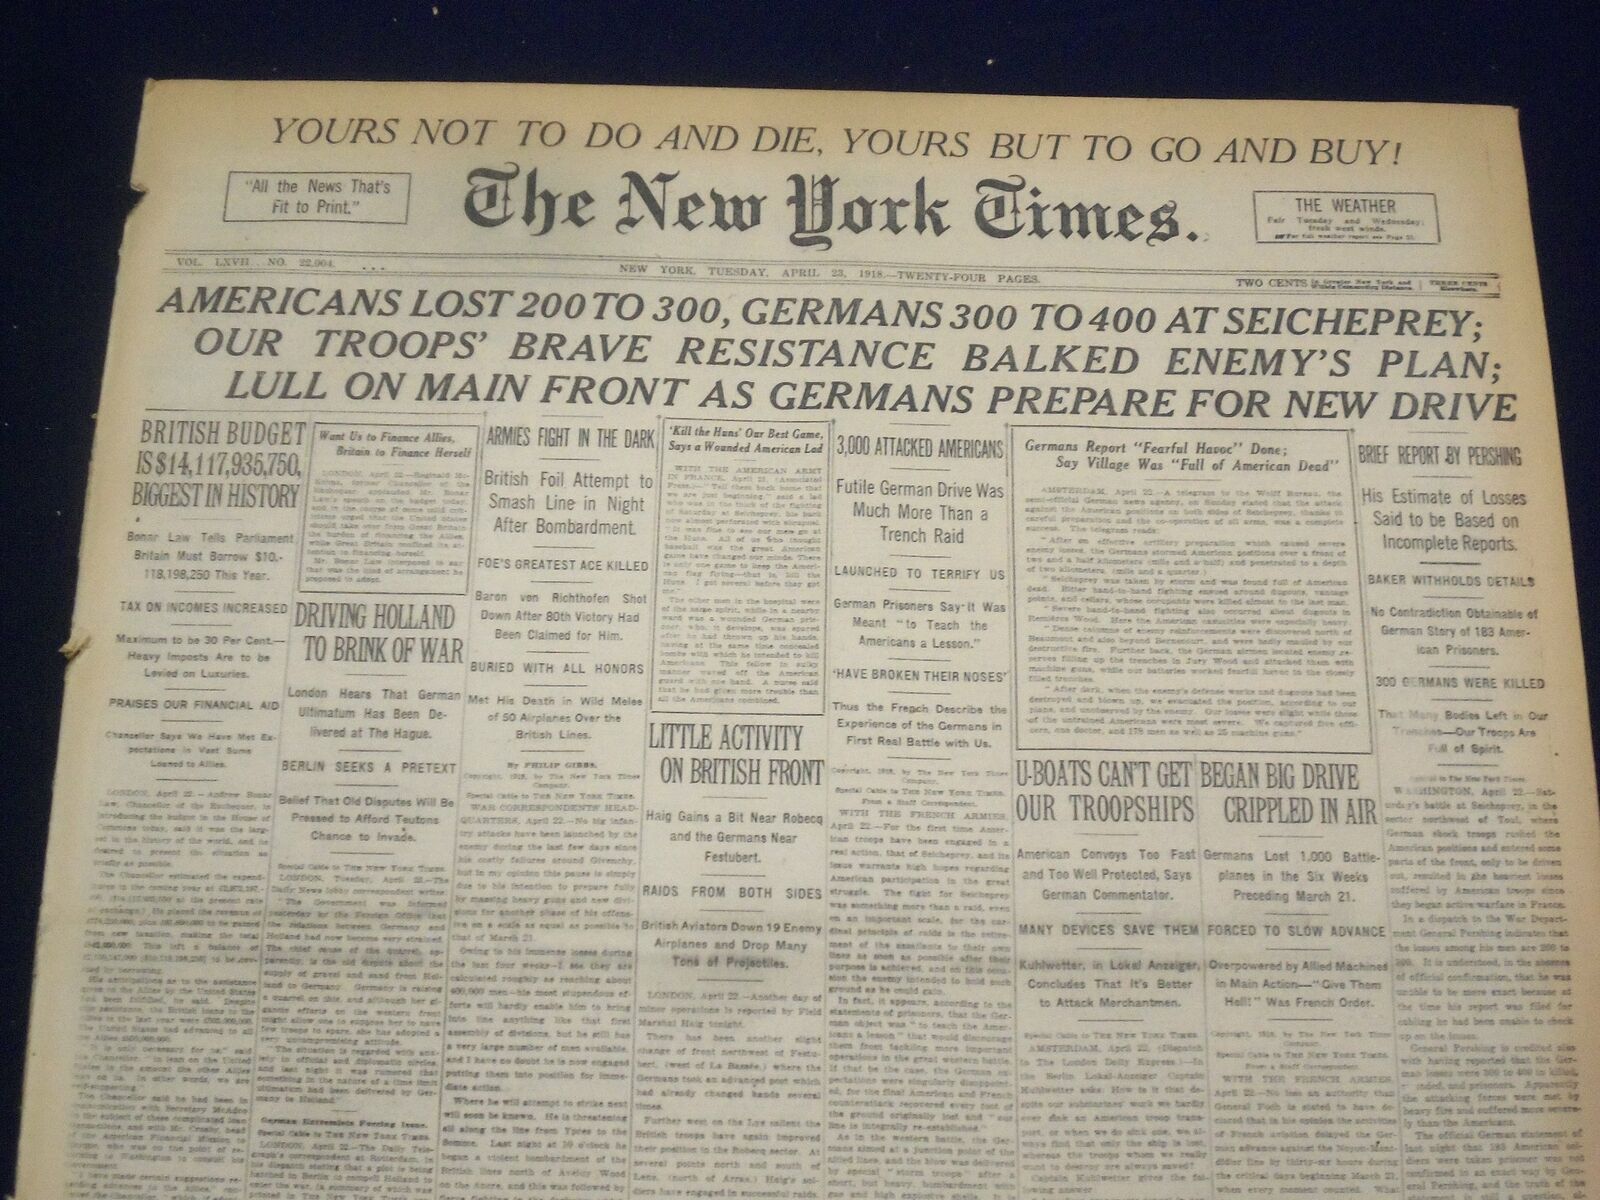 1918 APRIL 23 NEW YORK TIMES - AMERICANS LOST 200 TO 300 AT SEICHEPREY - NT 8219